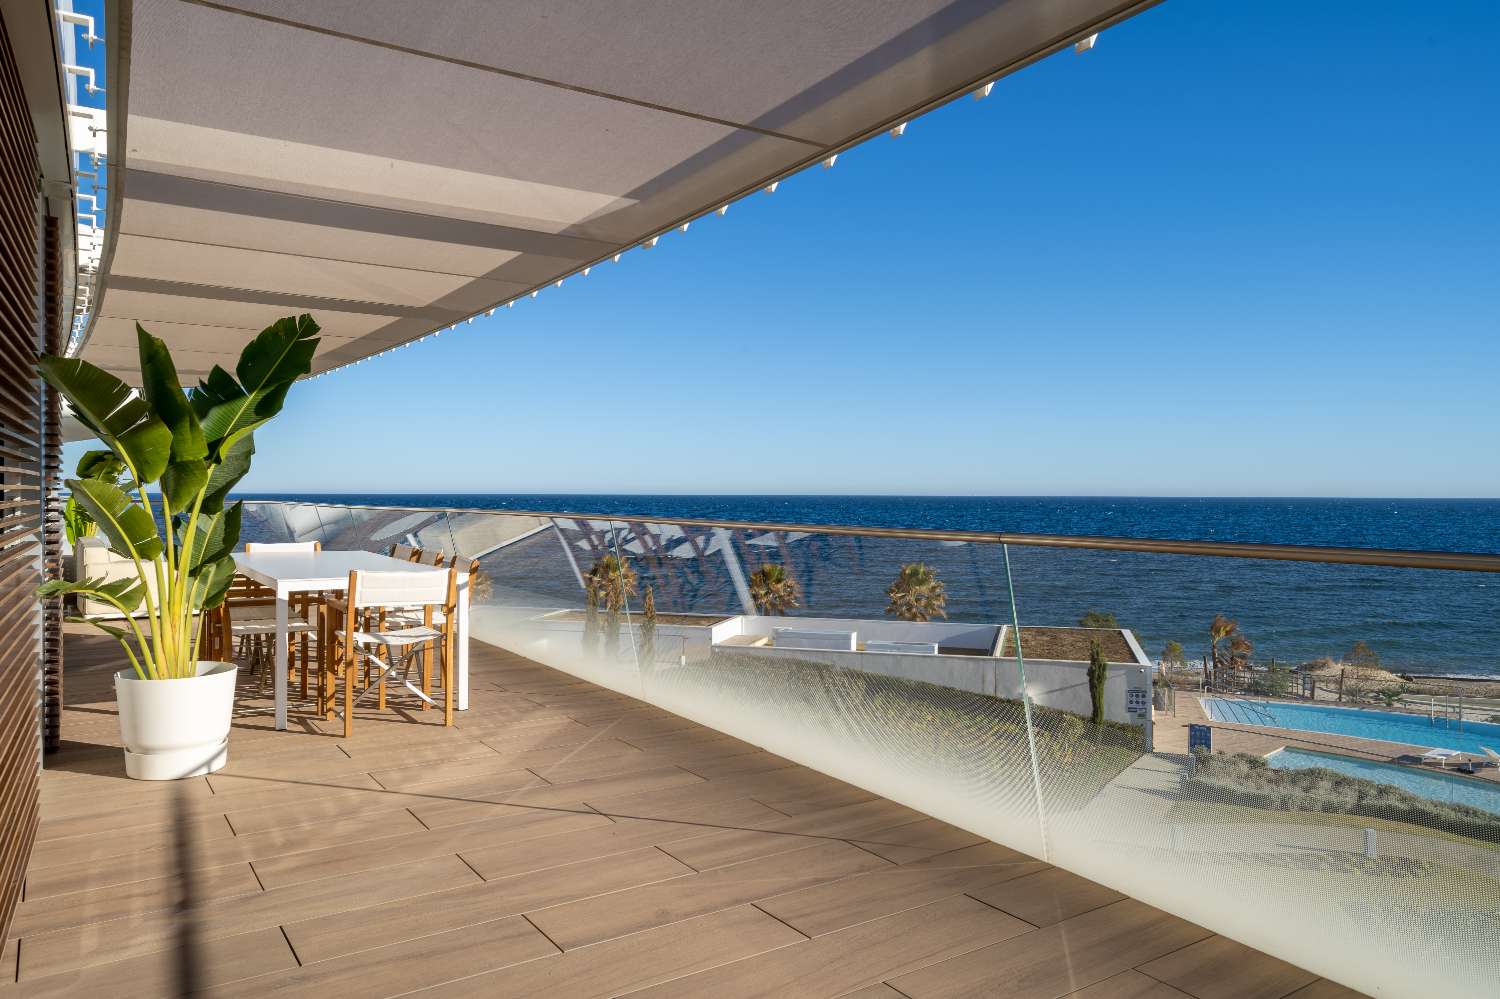 Fabulous duplex 4 Bedroom Penthouse with panoramic sea views. Interior Design by Aalto included in price.